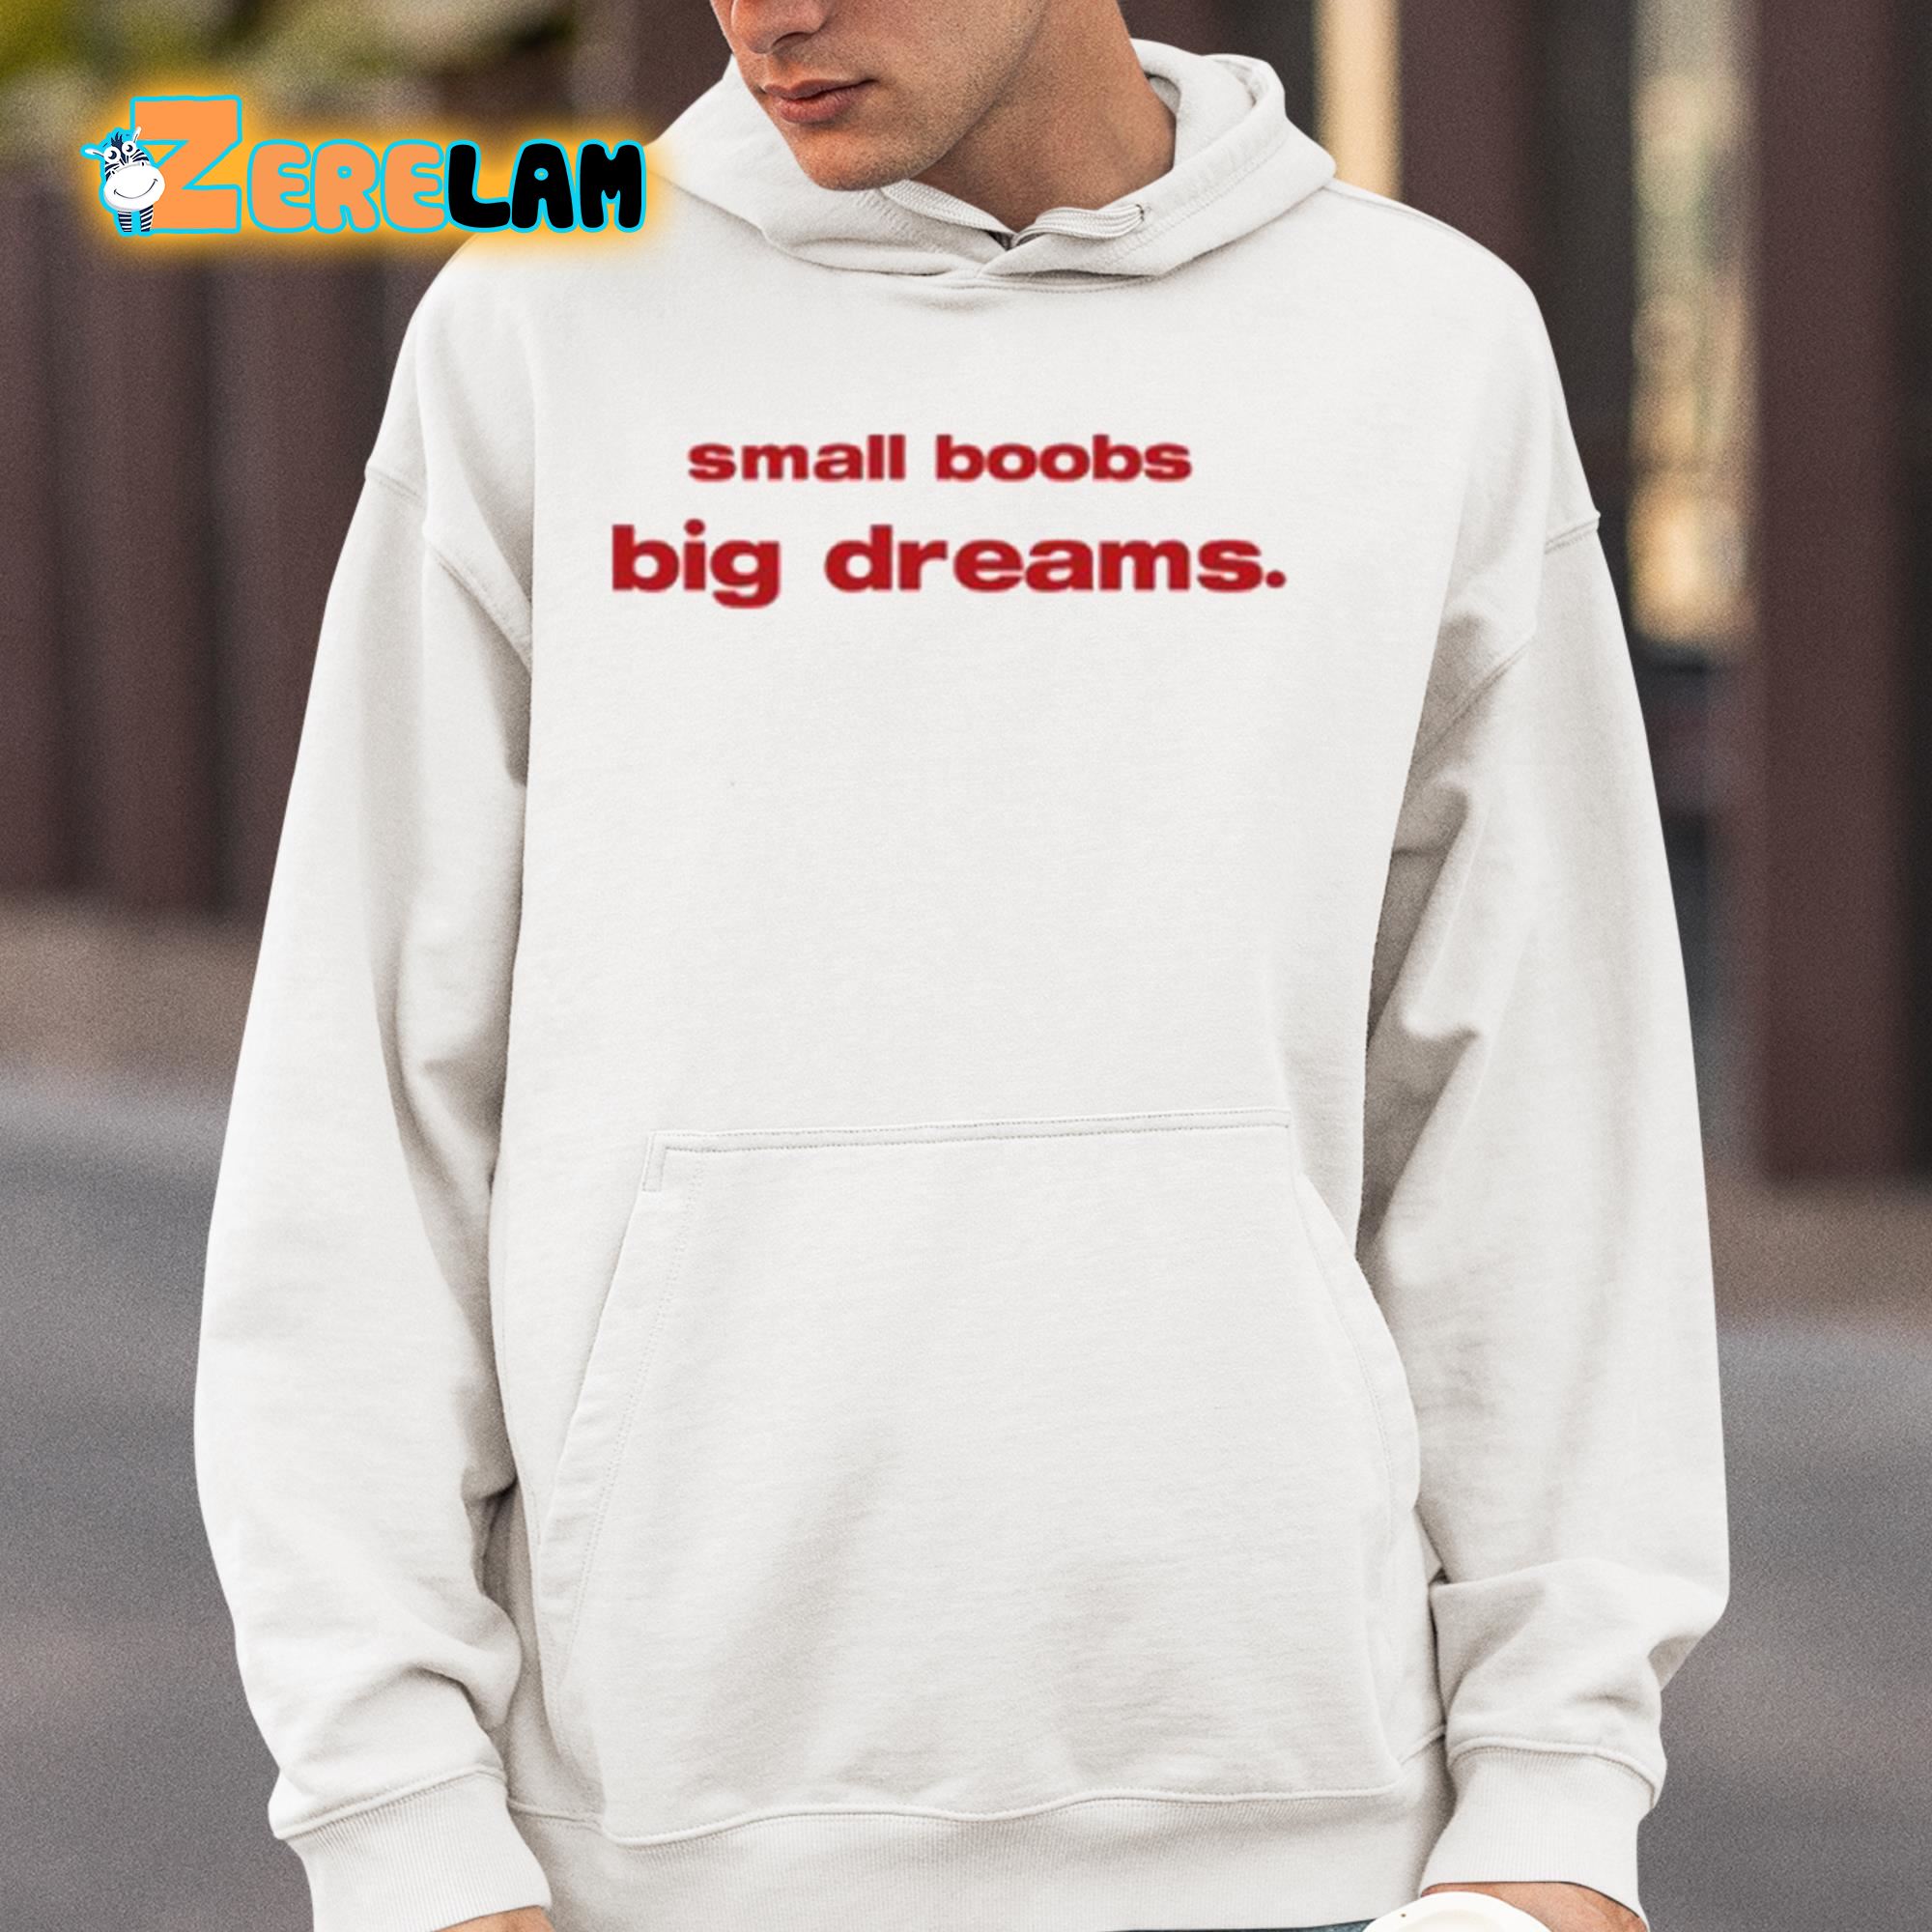 Big Boobs Design - Huge Boobs T Shirts, Hoodies & Dresses - Big Breasted  Women Essential T-Shirt for Sale by itslamby